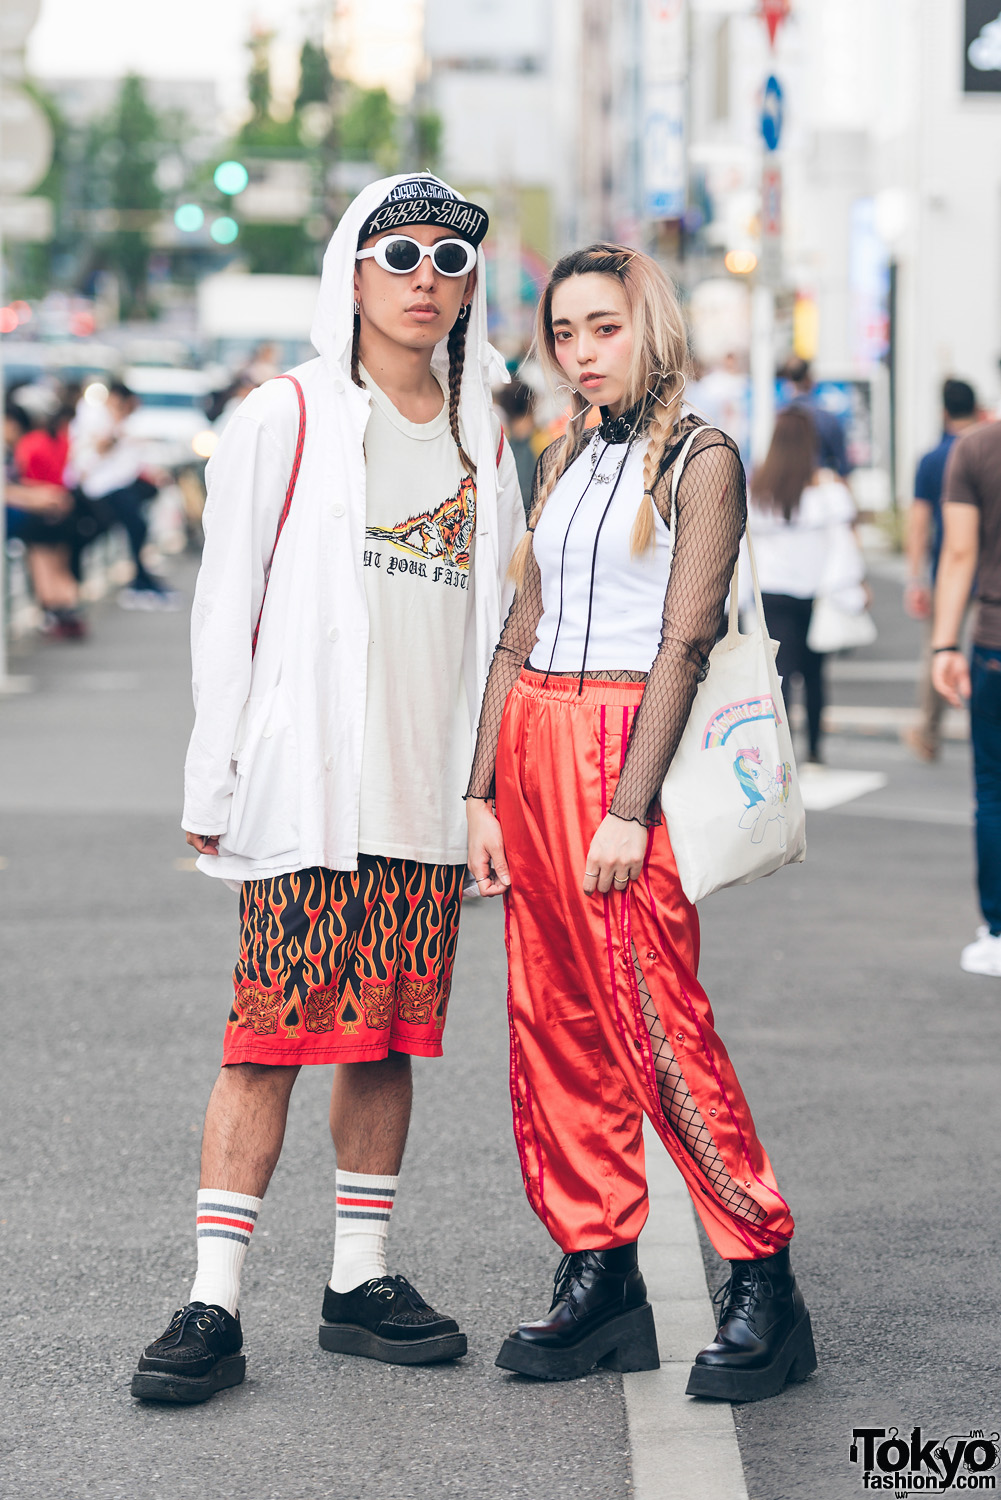 Harajuku Duo in Red & White Streetwear w/ Bubbles, UNIF, George Cox, Rebel 8, NLF & My Little Pony